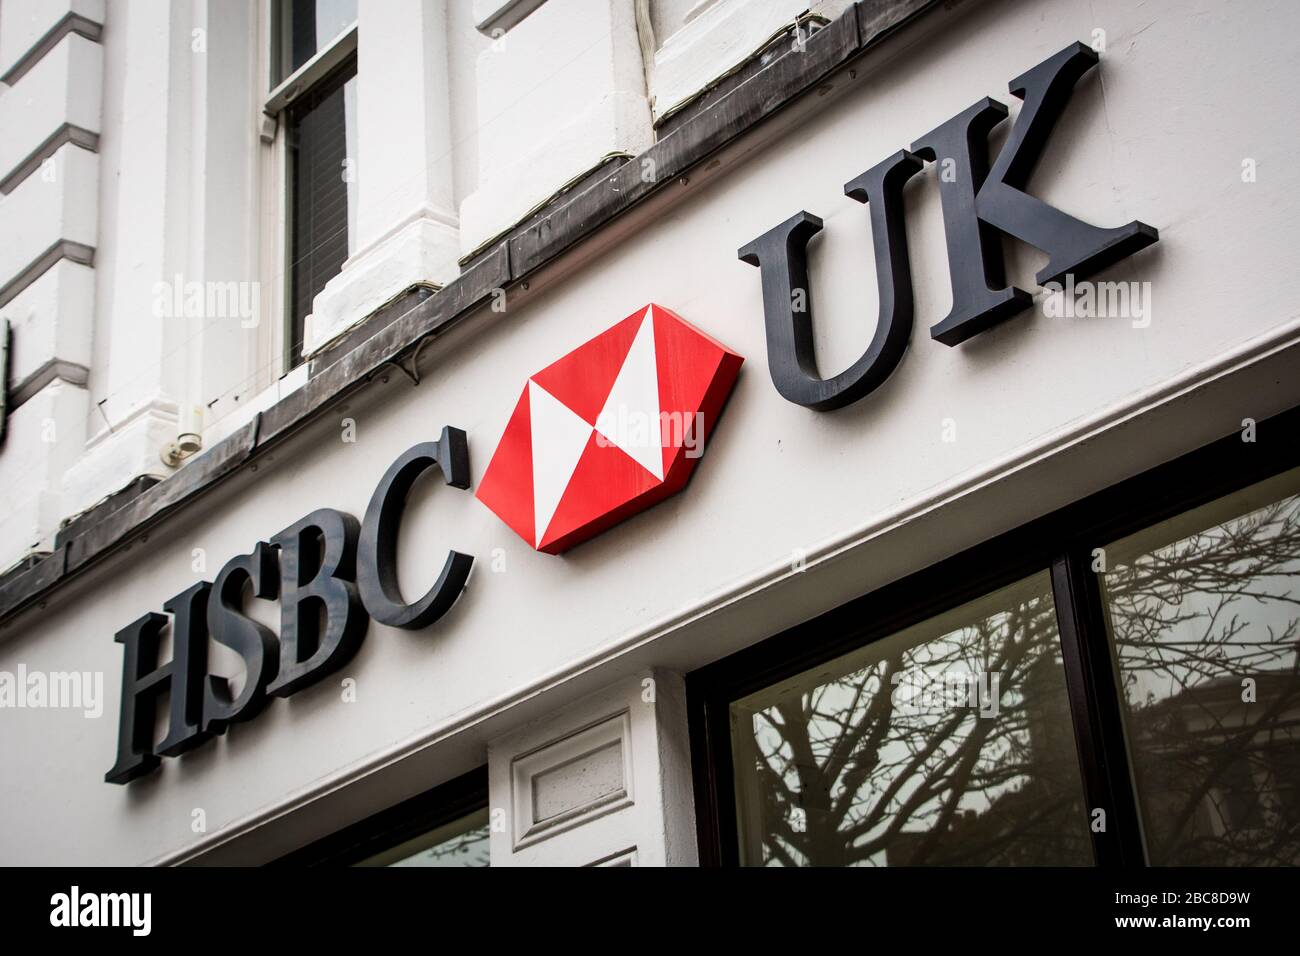 HSBC branch logo- British high street retail and commercial bank Stock Photo